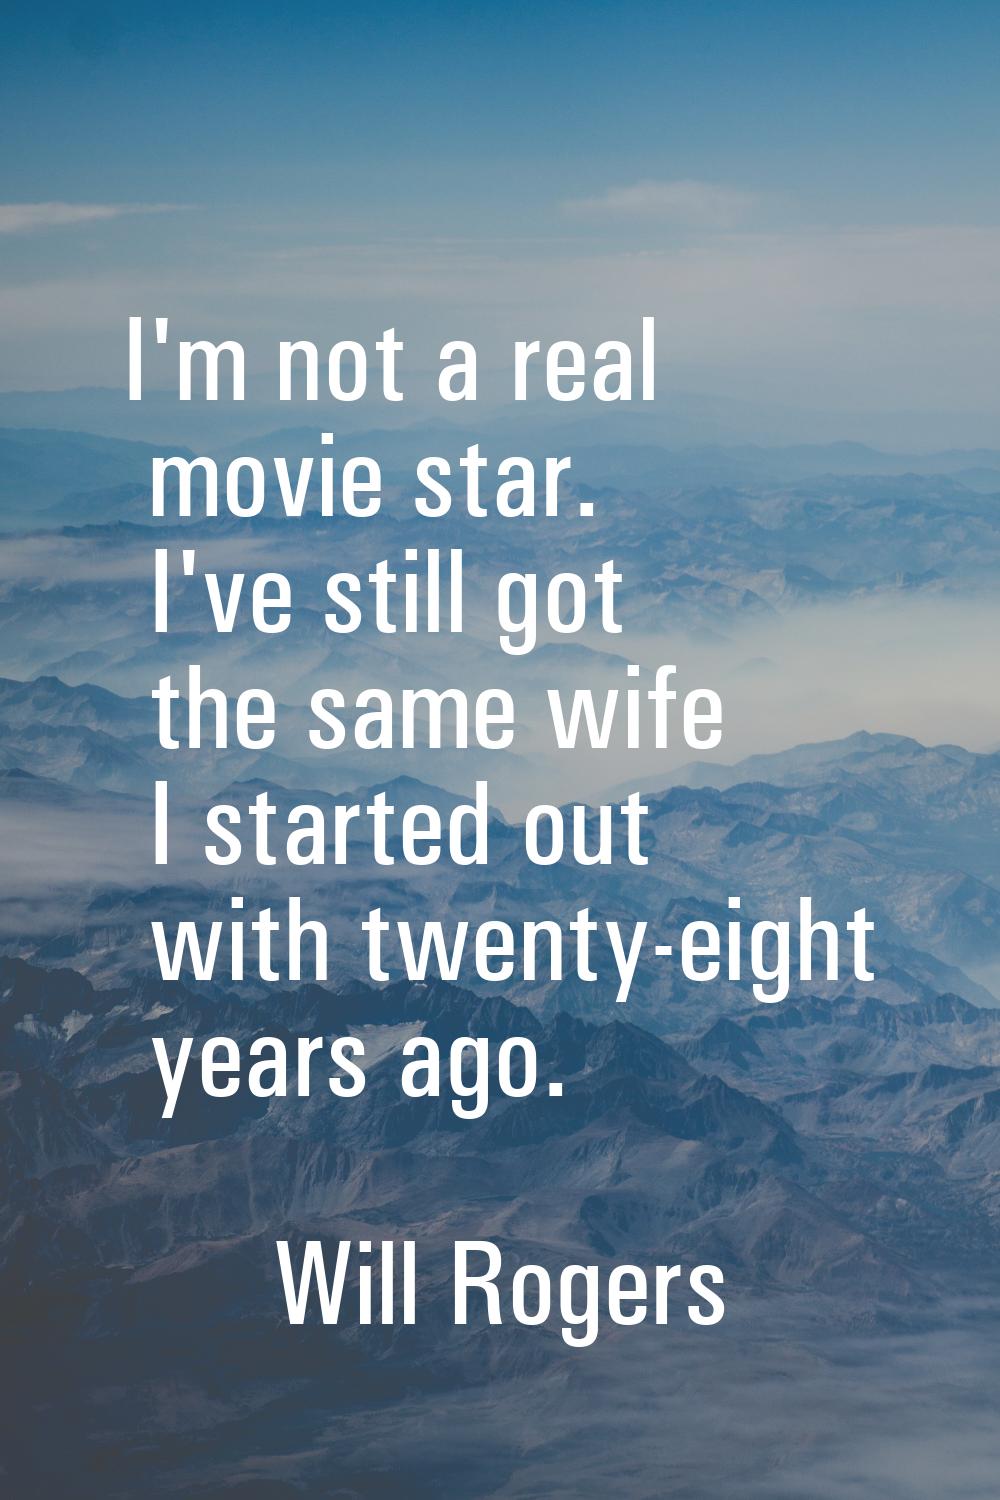 I'm not a real movie star. I've still got the same wife I started out with twenty-eight years ago.